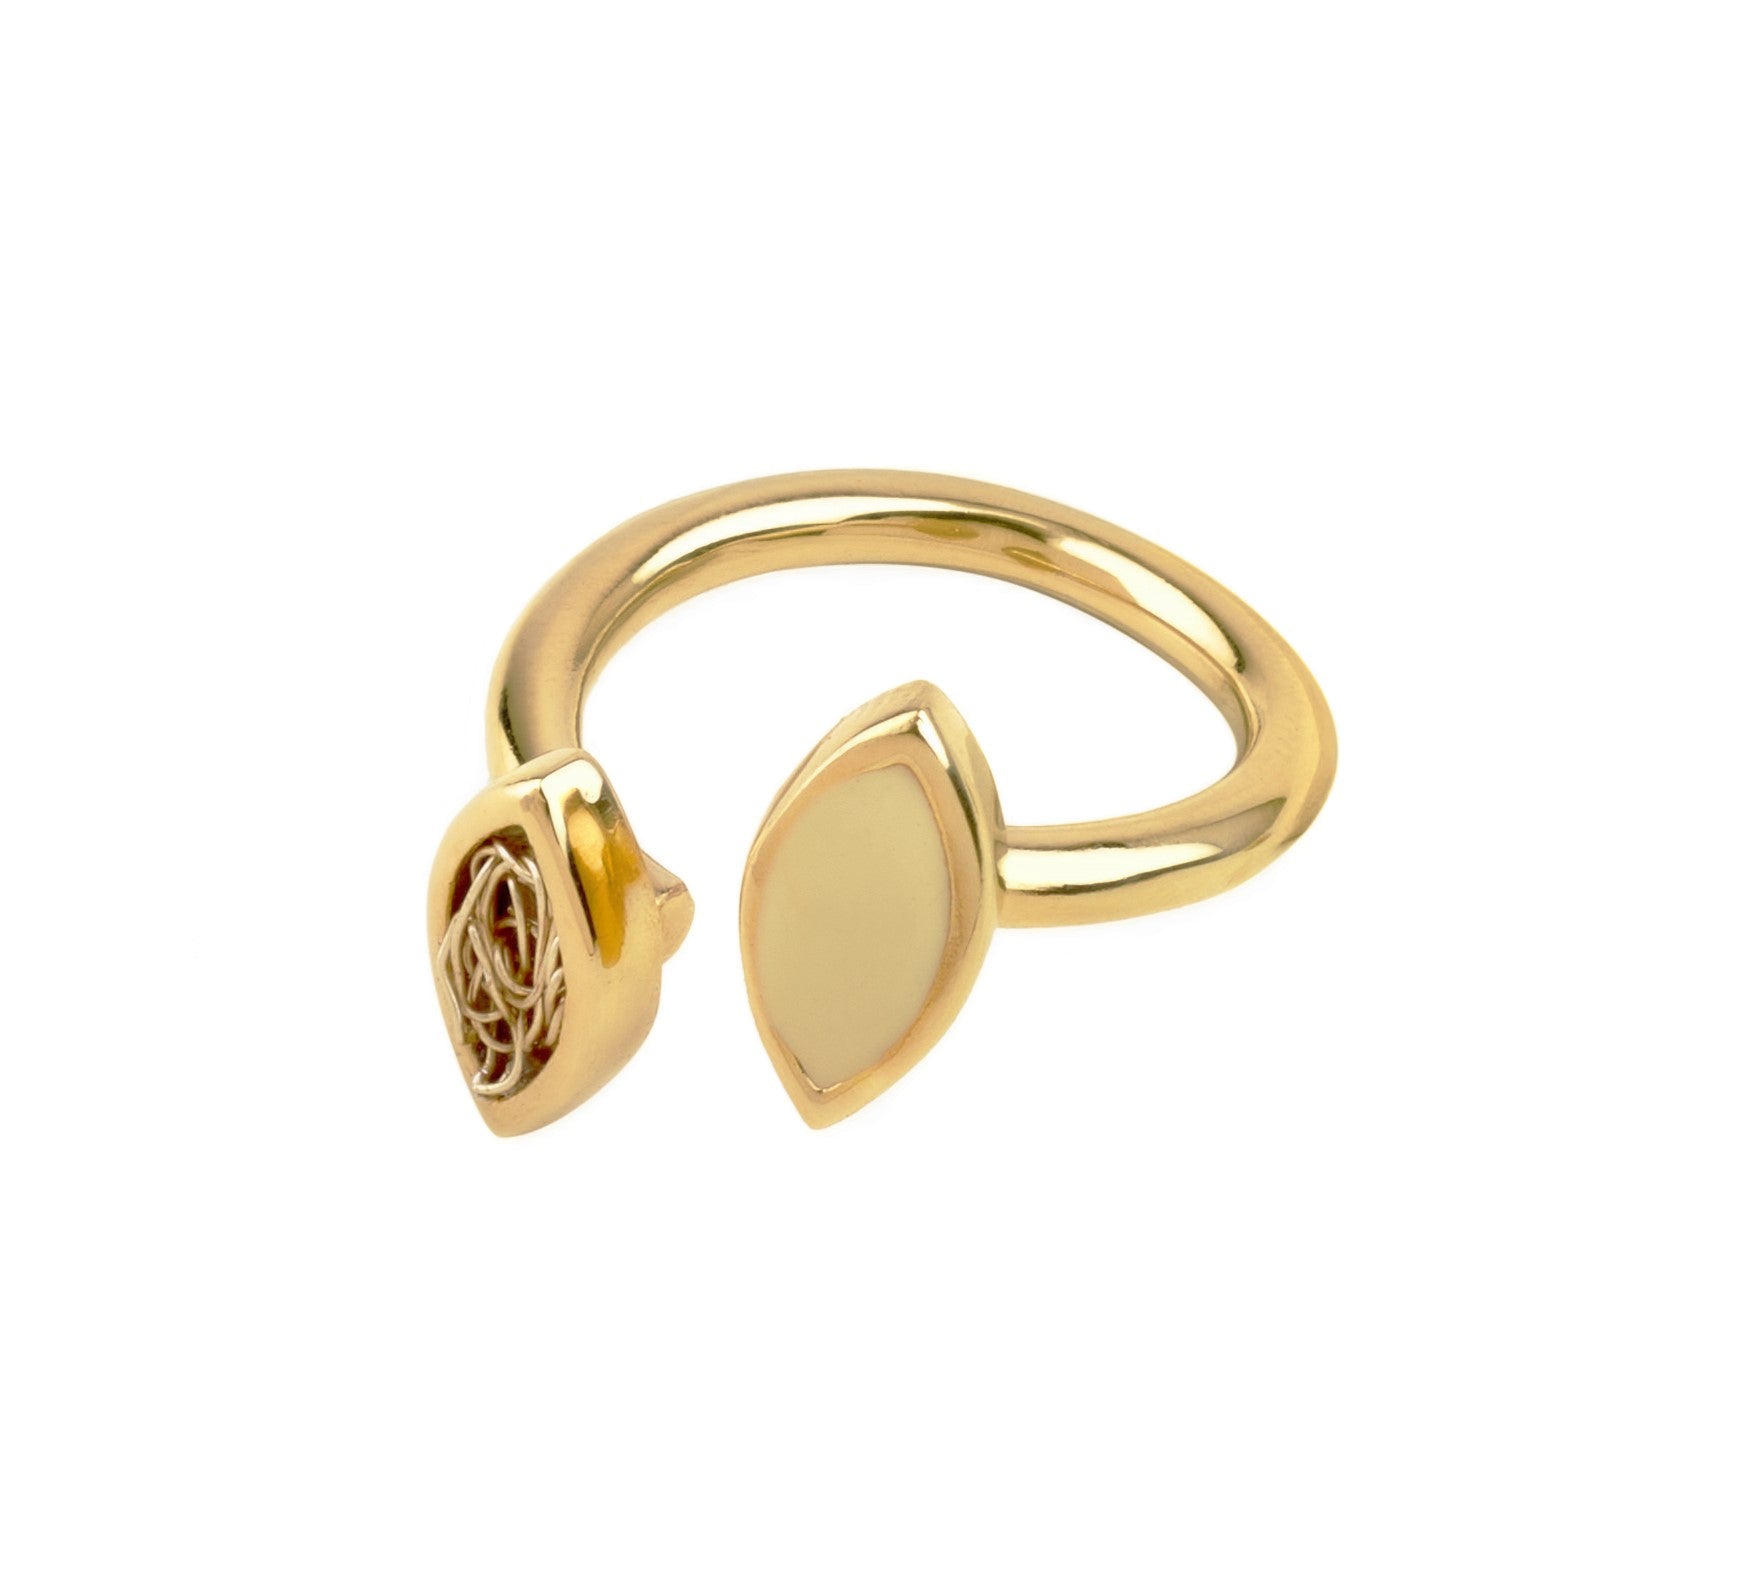 Delicate gold ring with intricate handmade details, adding a touch of individuality to your jewelry collection.